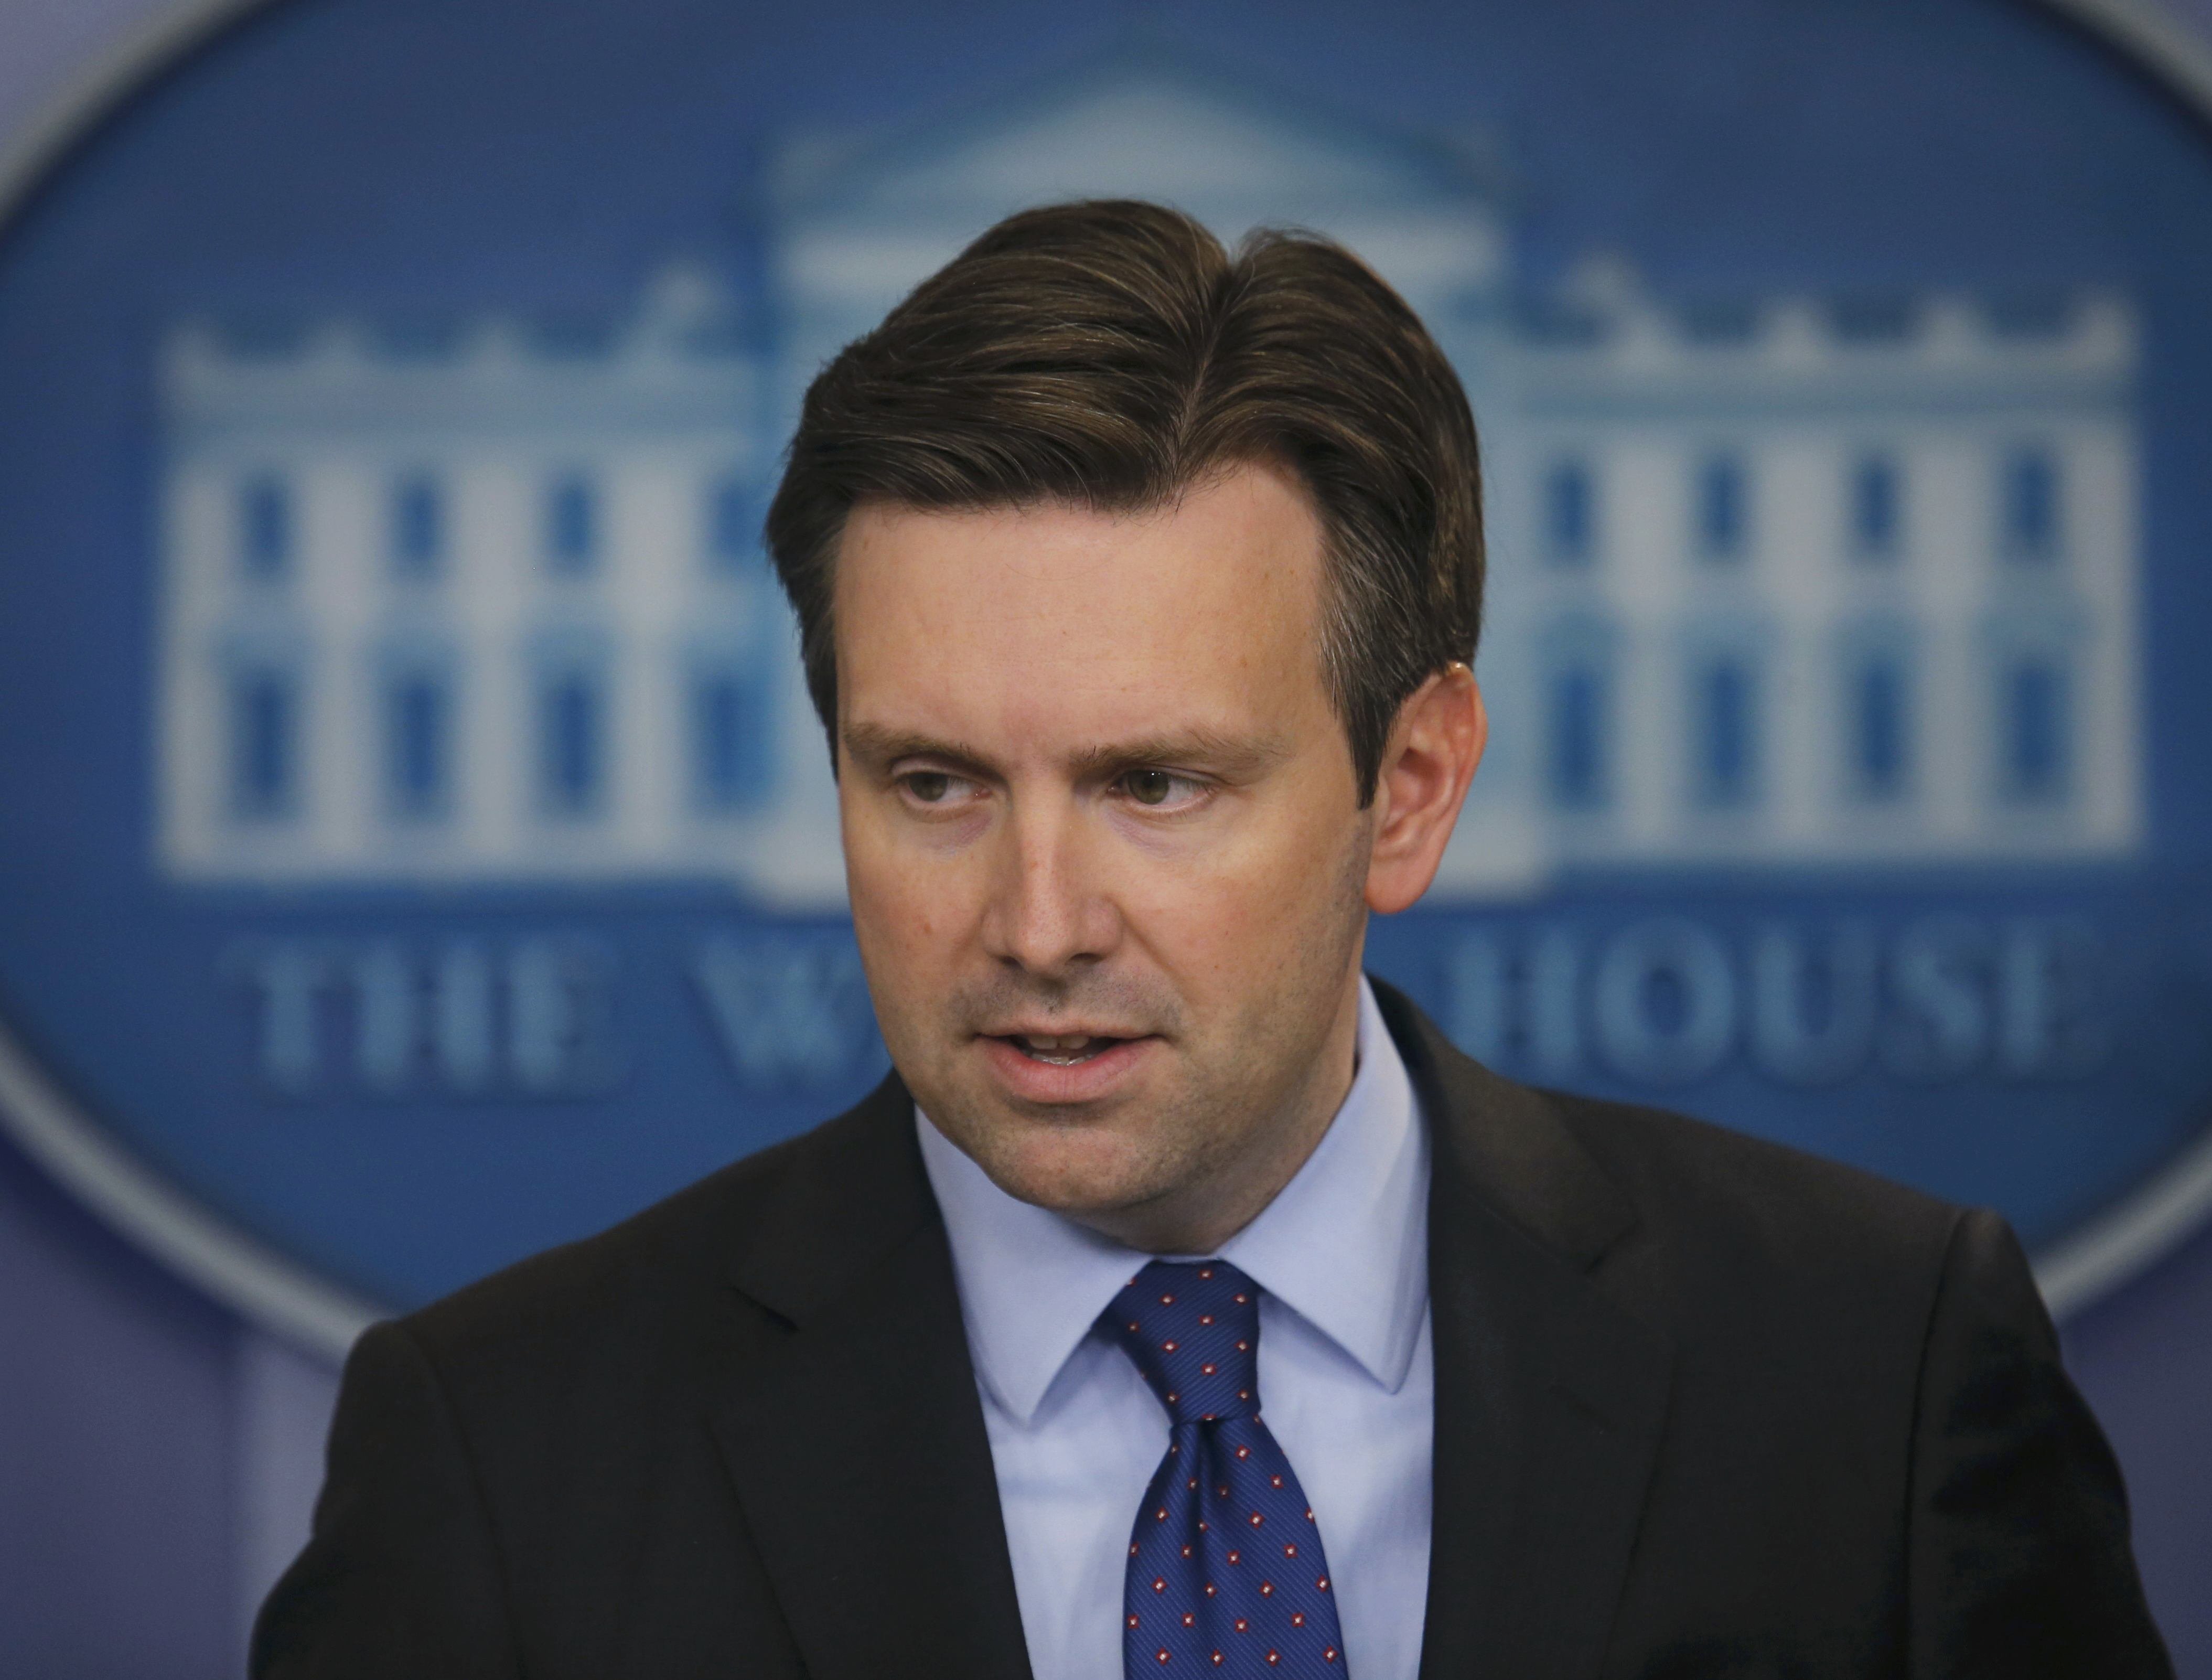 Josh Earnest during a media briefing at the White House in Washington on Oct. 30, 2015. (Carlos Barria—Reuters)